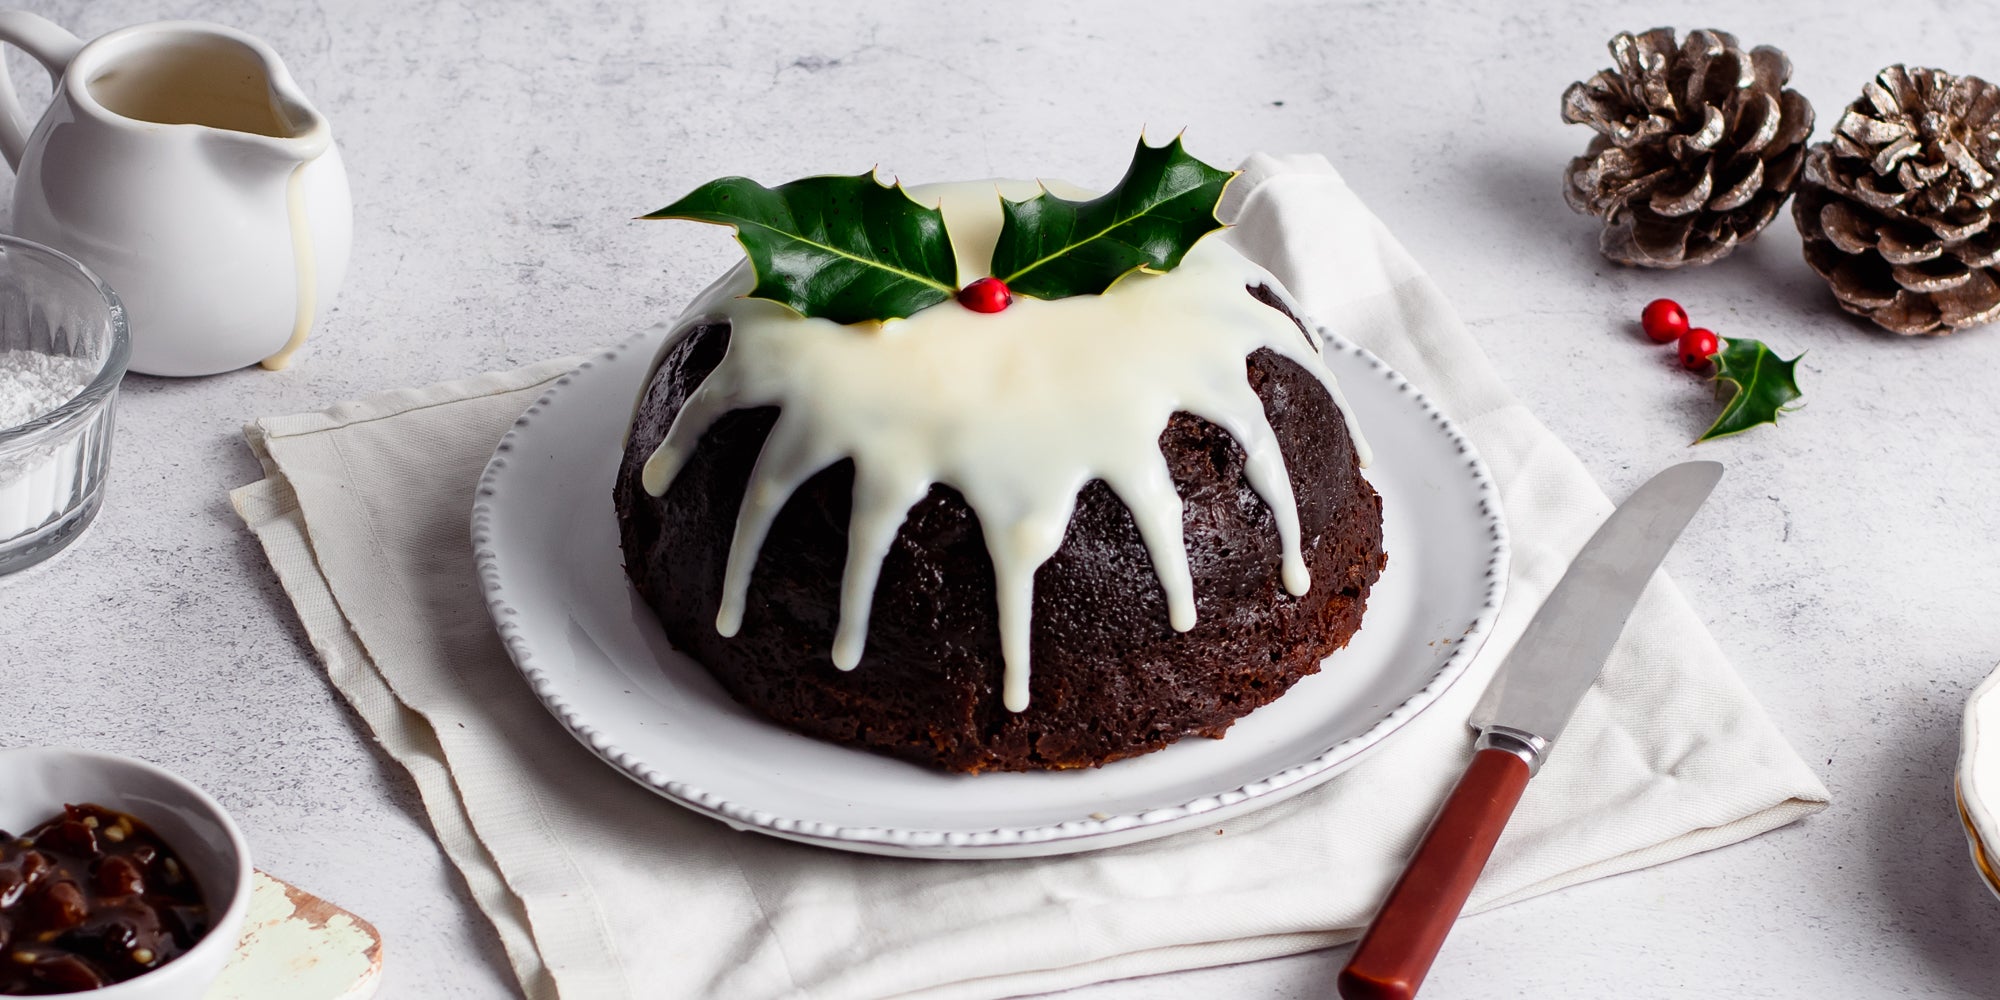 Last Minute Christmas Pudding covered in a generous pouring of cream or brandy butter, dripping down the sides next to a knife and a holly leaf